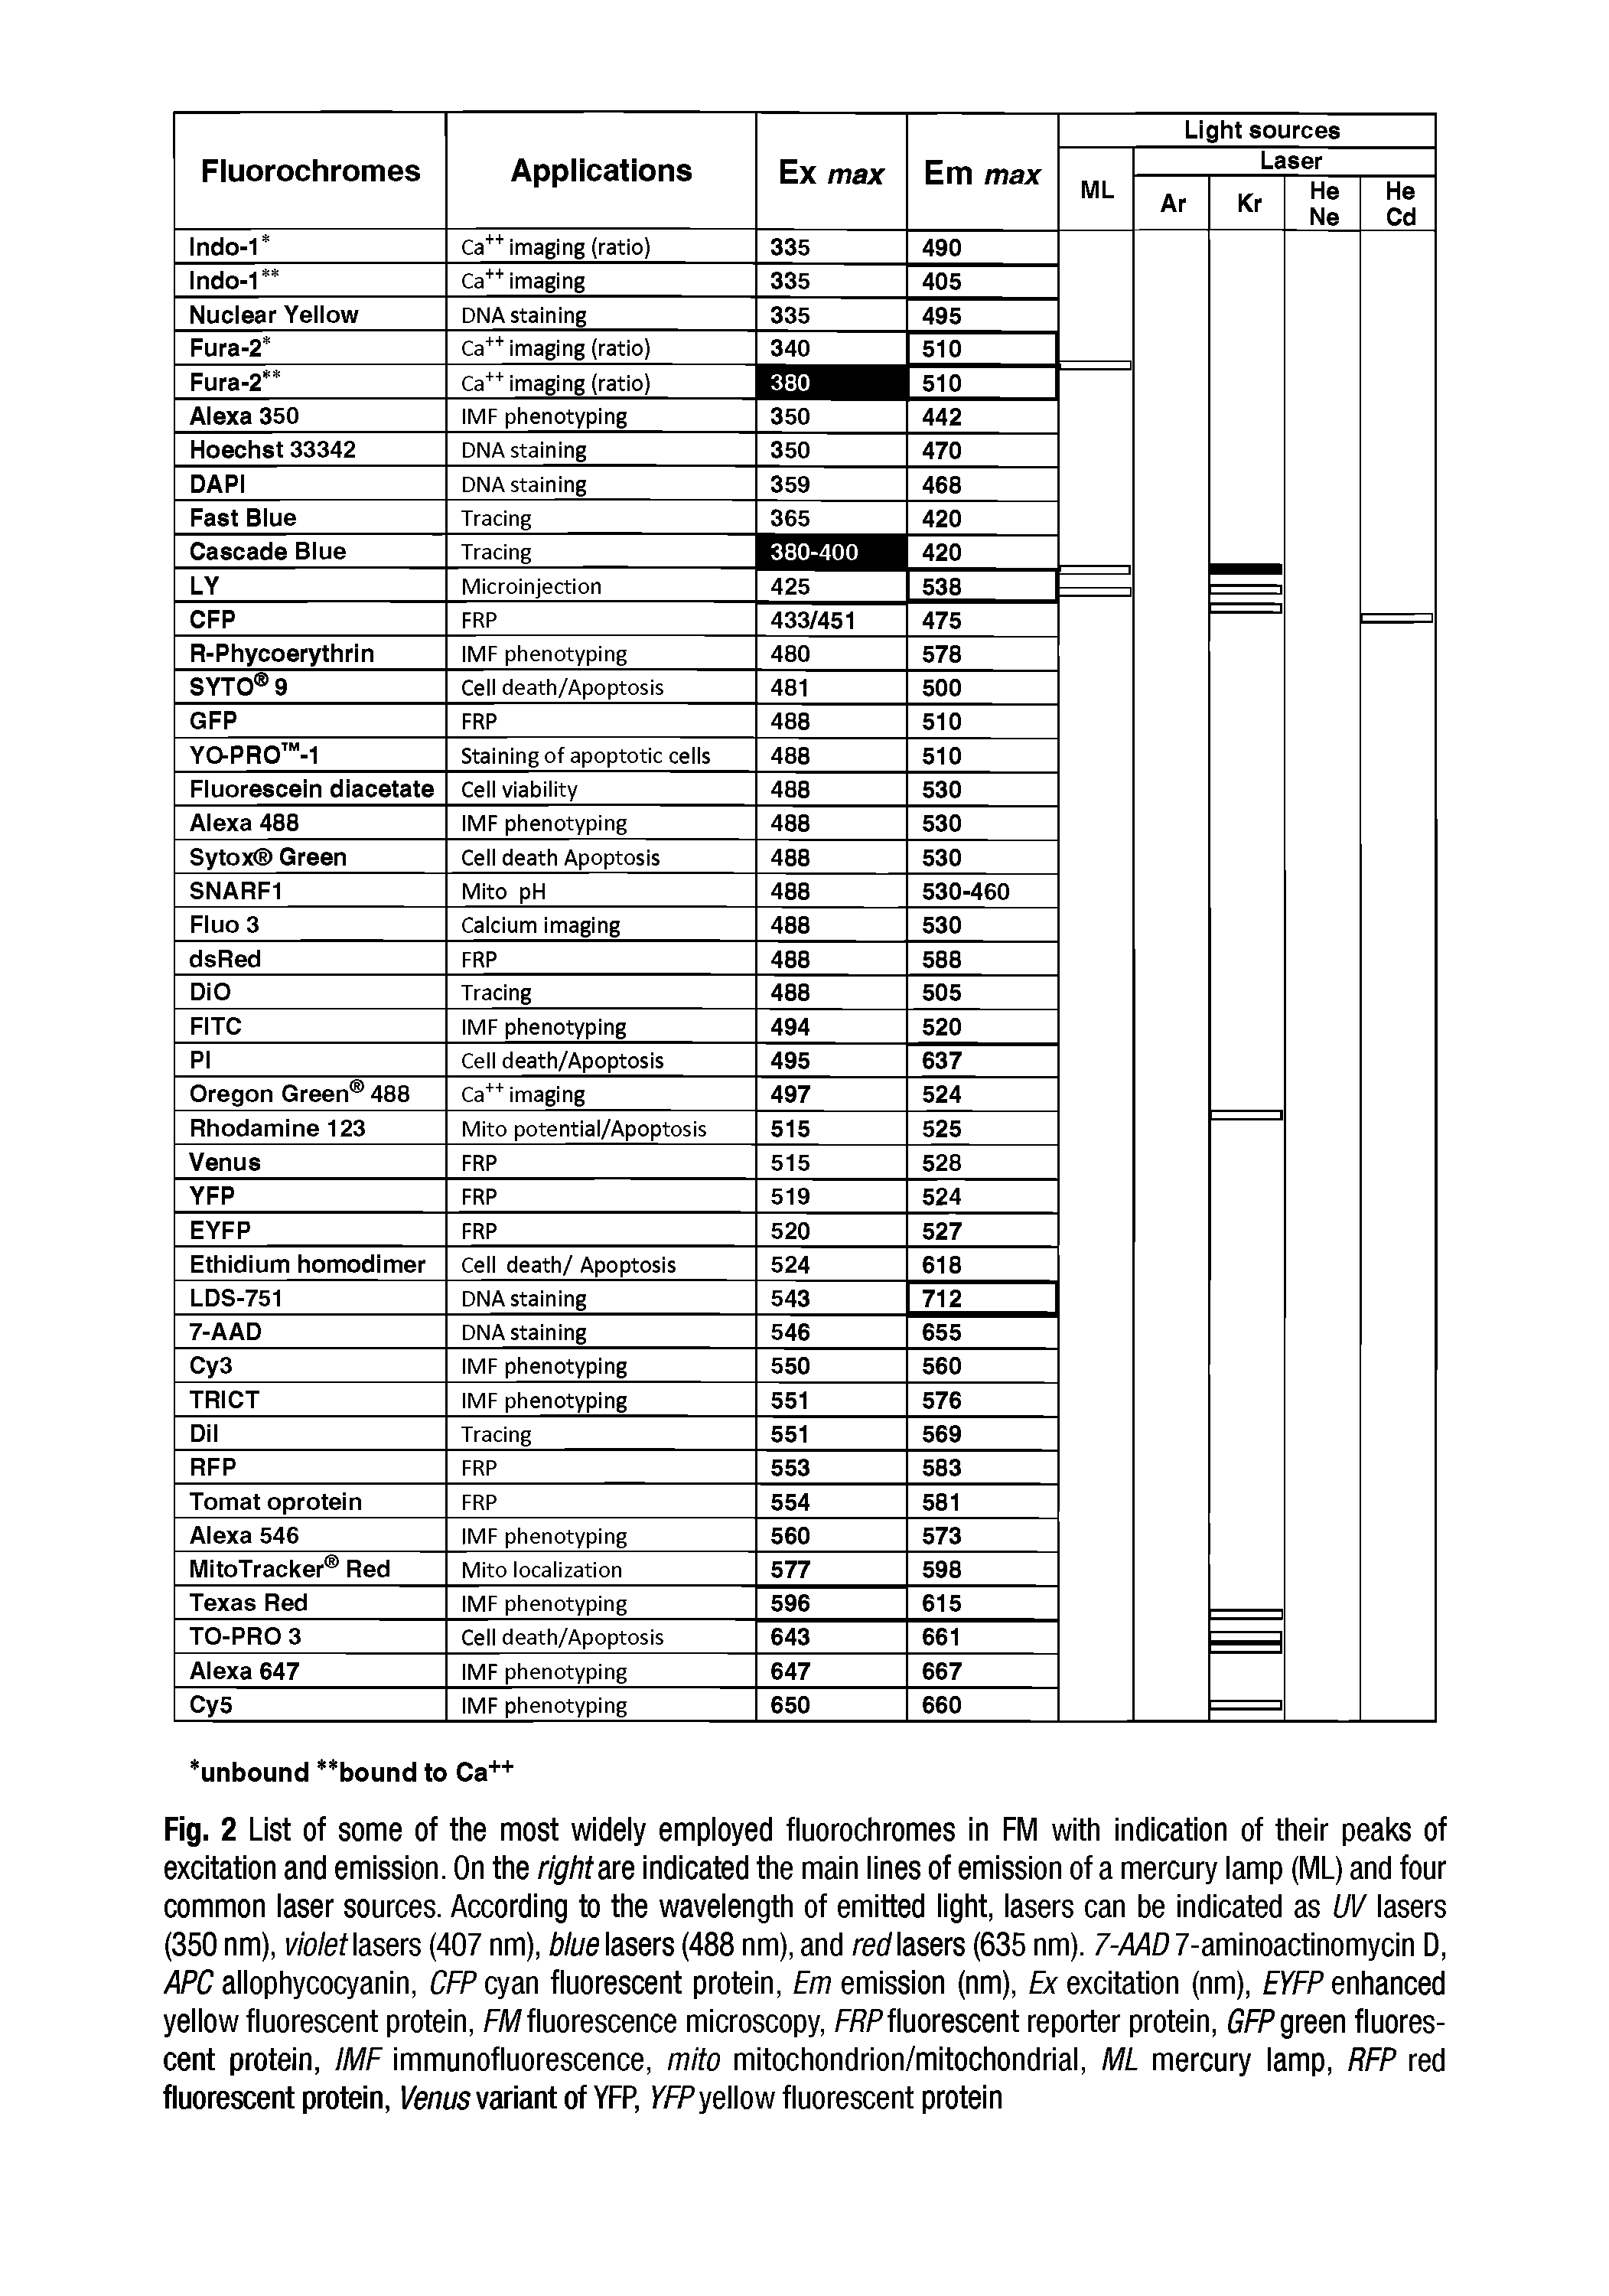 Fig. 2 List of some of the most widely employed fluorochromes in FM with indication of their peaks of excitation and emission. On the right are indicated the main lines of emission of a mercury lamp (ML) and four common laser sources. According to the wavelength of emitted light, lasers can be indicated as UV lasers (350 nm), violet lasers (407 nm), Wue lasers (488 nm), and ref/lasers (635 nm). 7-A4D7-aminoactinomycin 0, APC allophycocyanin, CFP cyan fluorescent protein, Em emission (nm). Ex excitation (nm), EYFP enhanced yellow fluorescent protein, FAf fluorescence microscopy, F/ Pfluorescent reporter protein, 6FF green fluorescent protein, IMF immunofluorescence, mito mitochondrion/mitochondrial, ML mercury lamp, RFP red fluorescent protein, variant of YFP, KFFyellowfluorescentprotein...